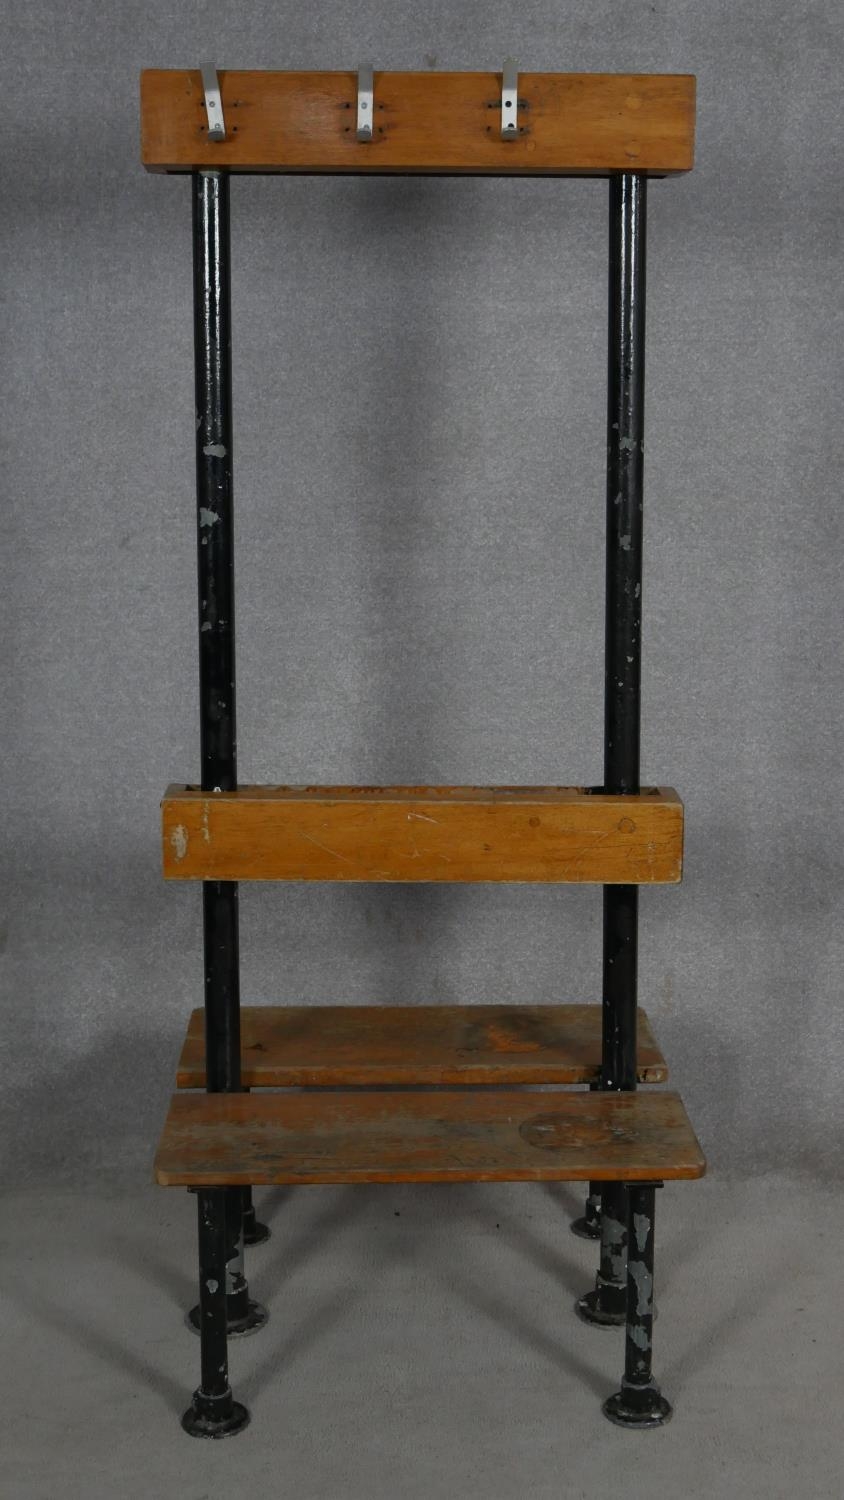 A mid century vintage teak and iron framed school or changing room bench and coat stand. H.171 L.